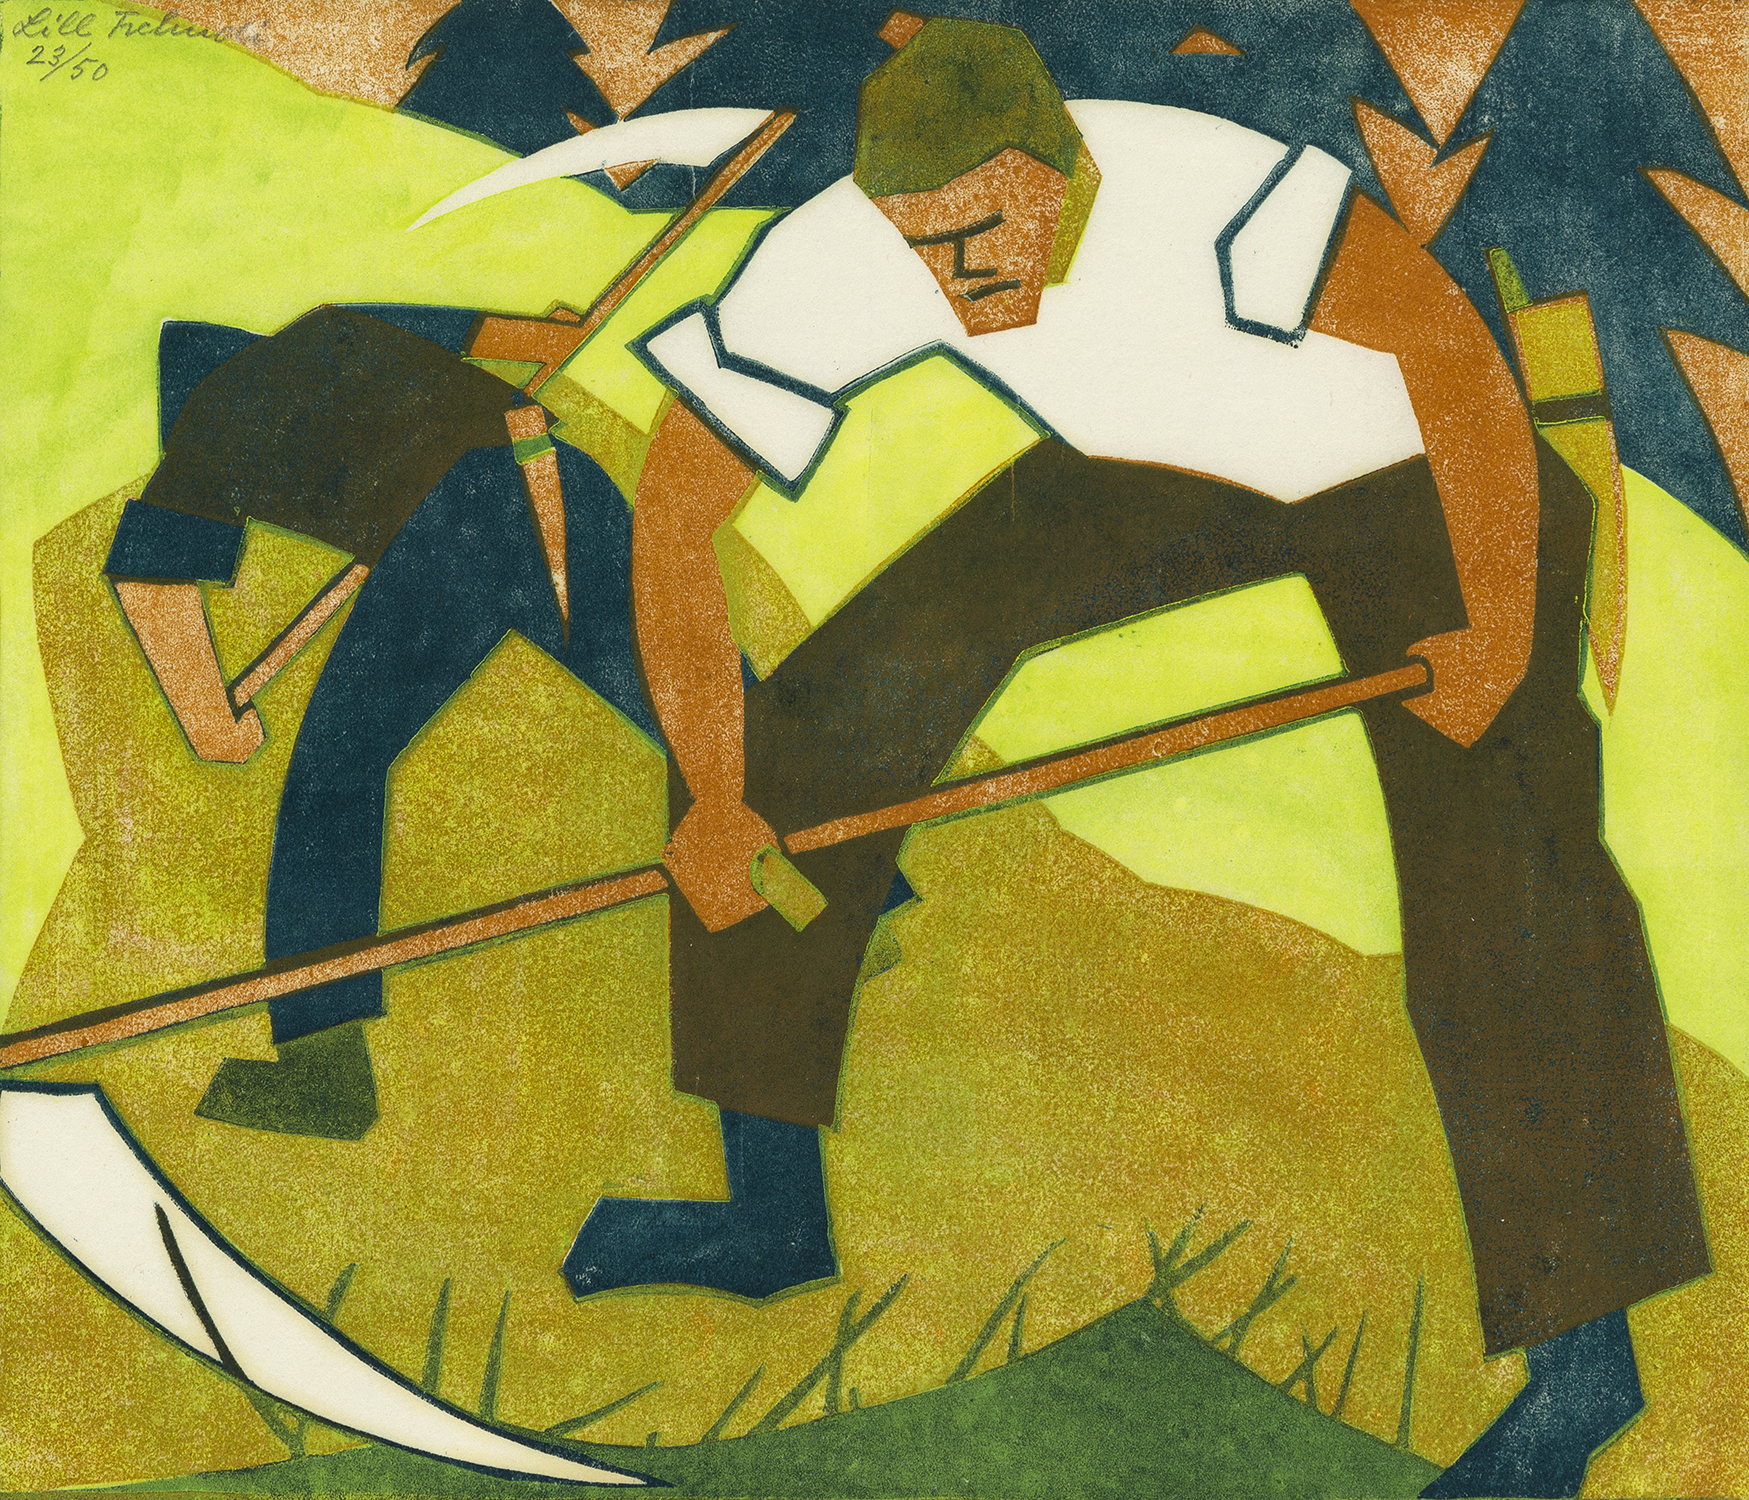 Haymaking, 1932, Linocut, 9 3/4 x 11 1/4 inches (24.8 x 28.6 cm), Edition of 50